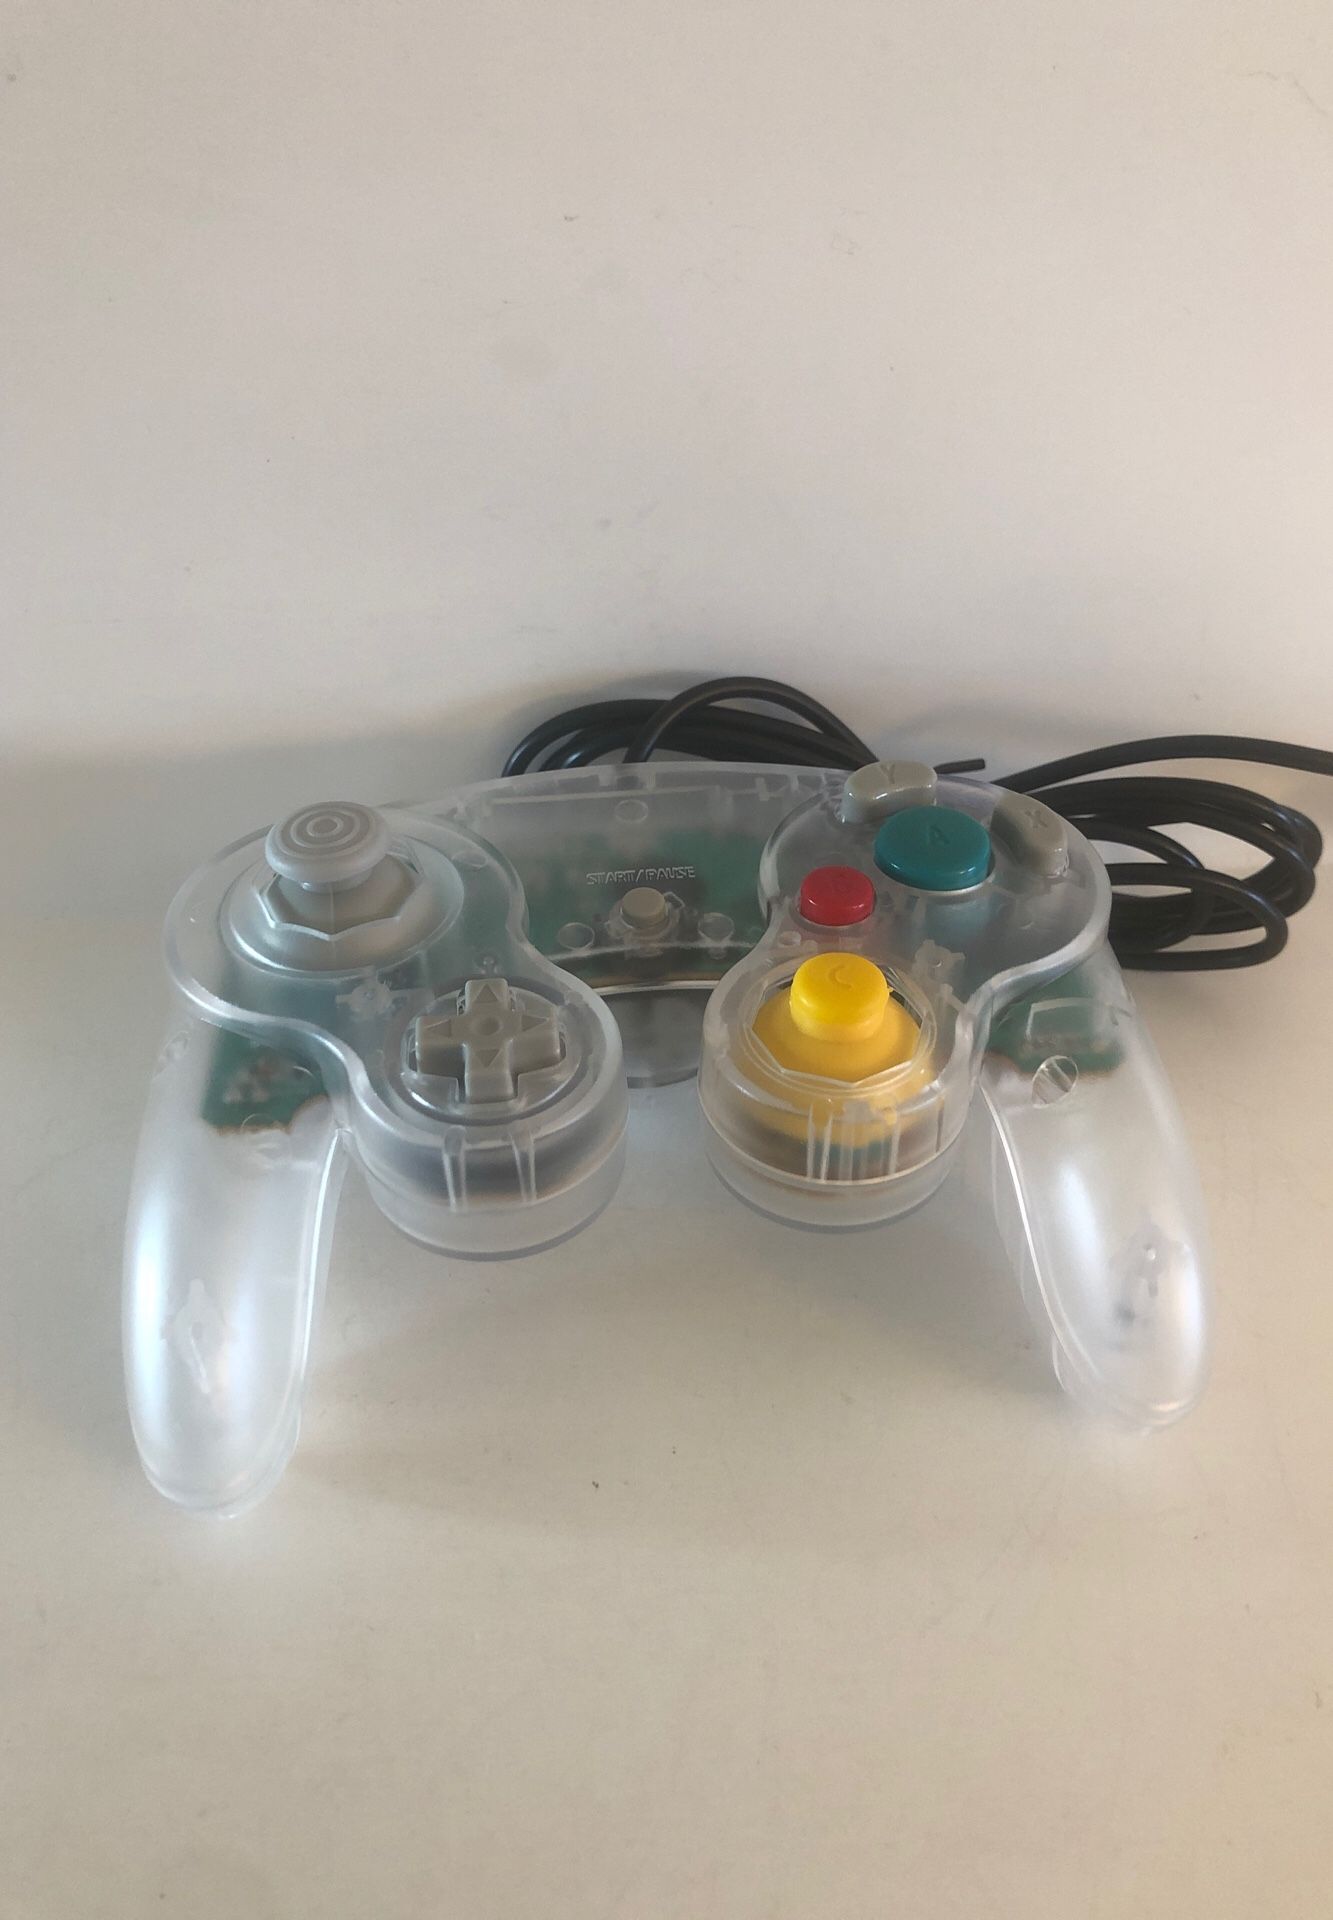 GameCube controller *New* Clear